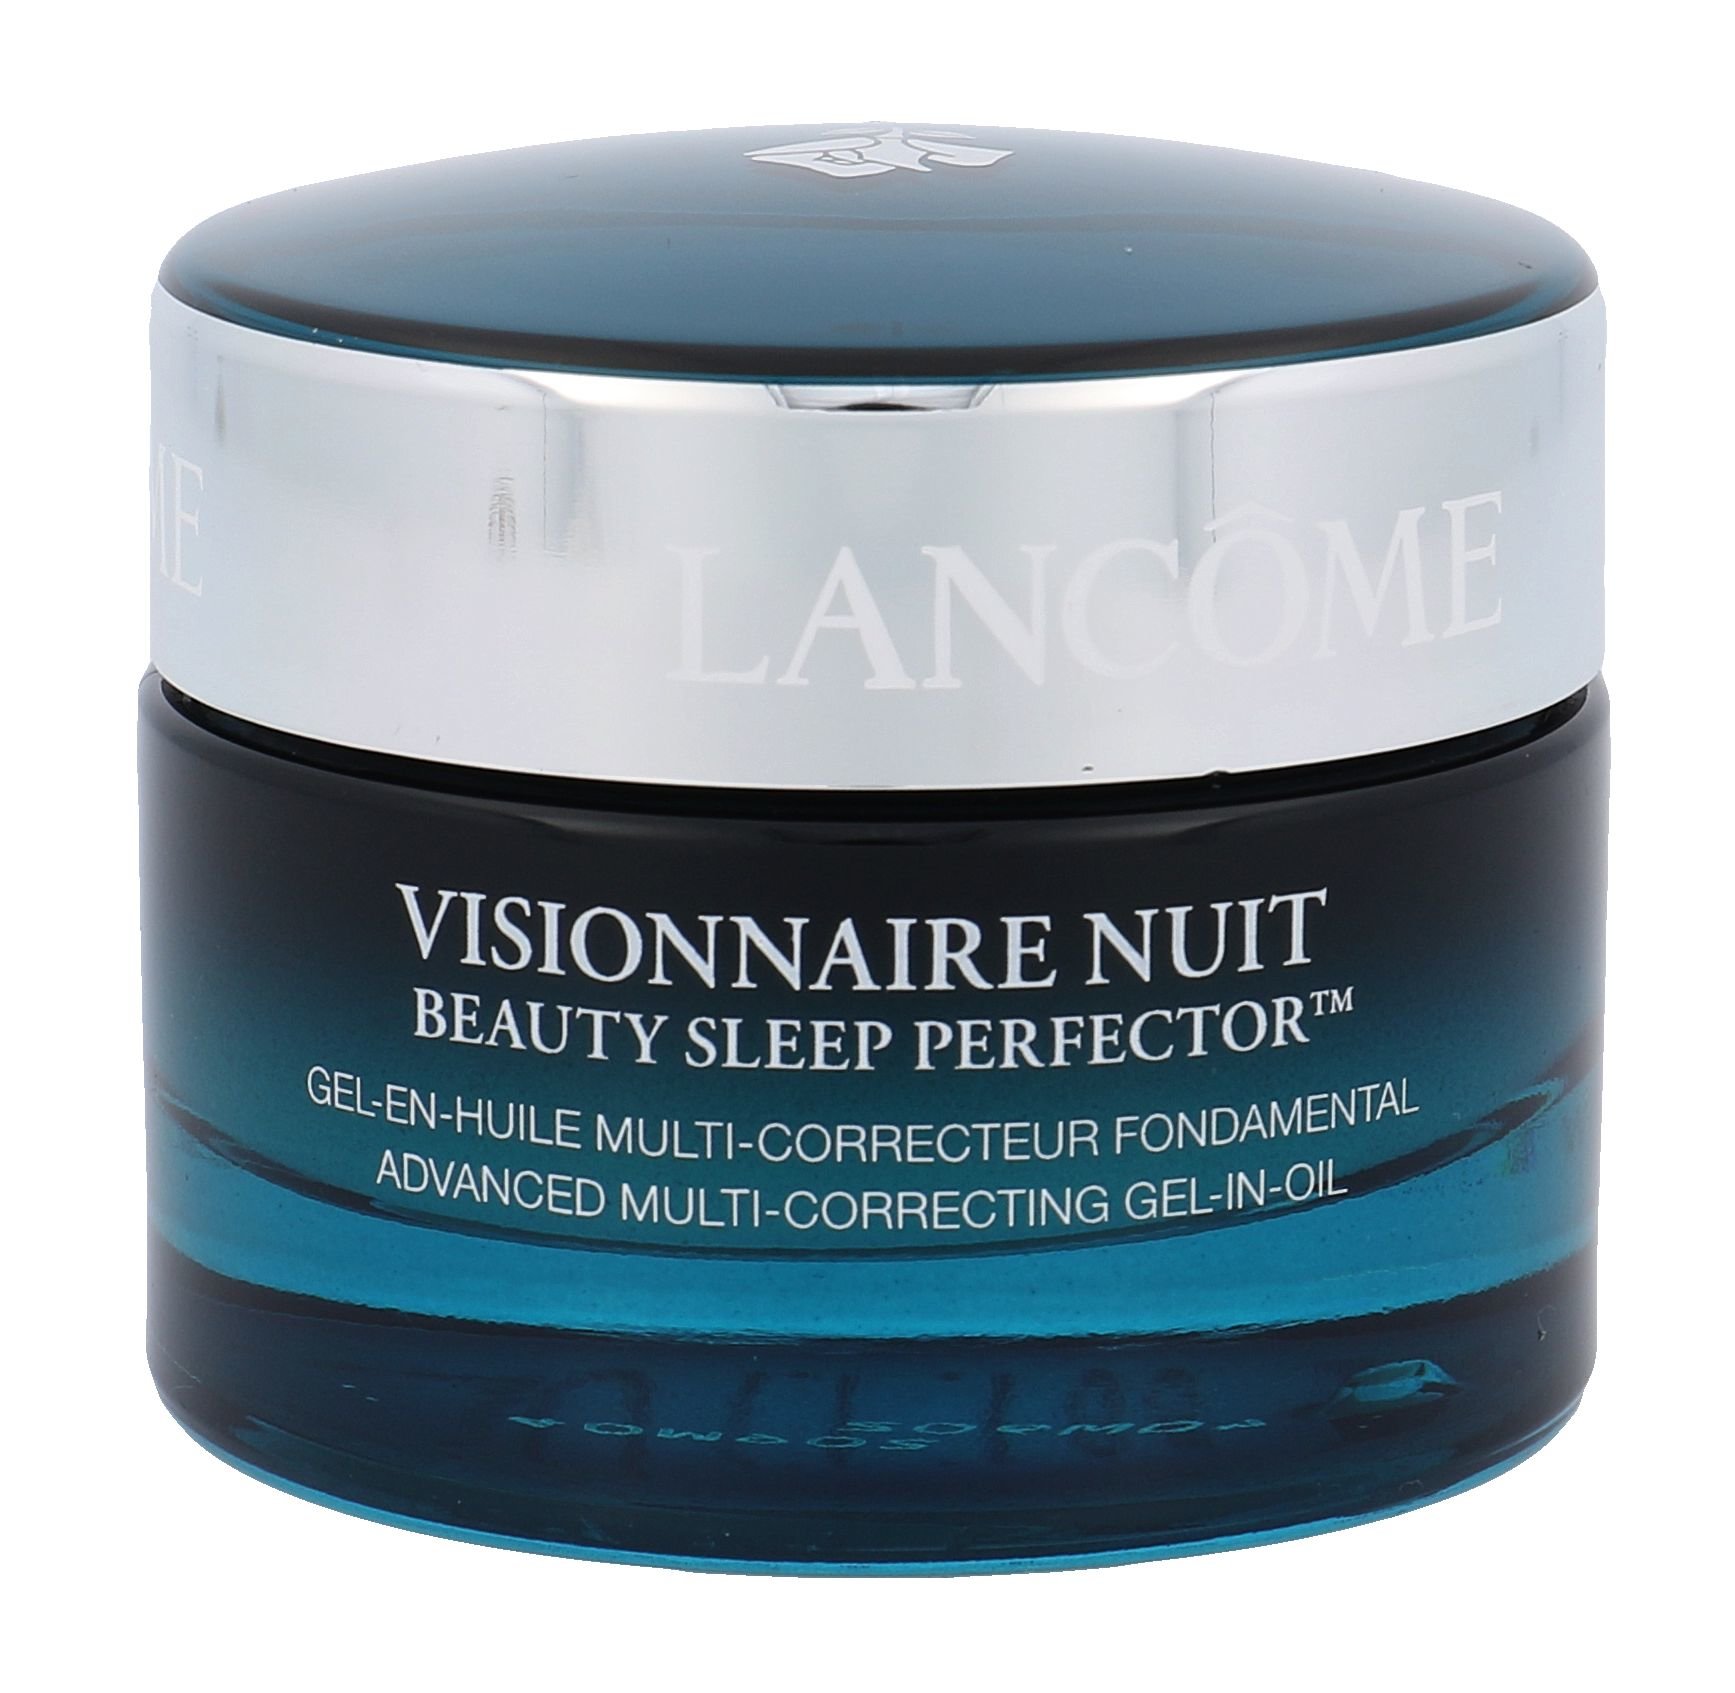 Lancome Visionnaire Night Gel In Oil